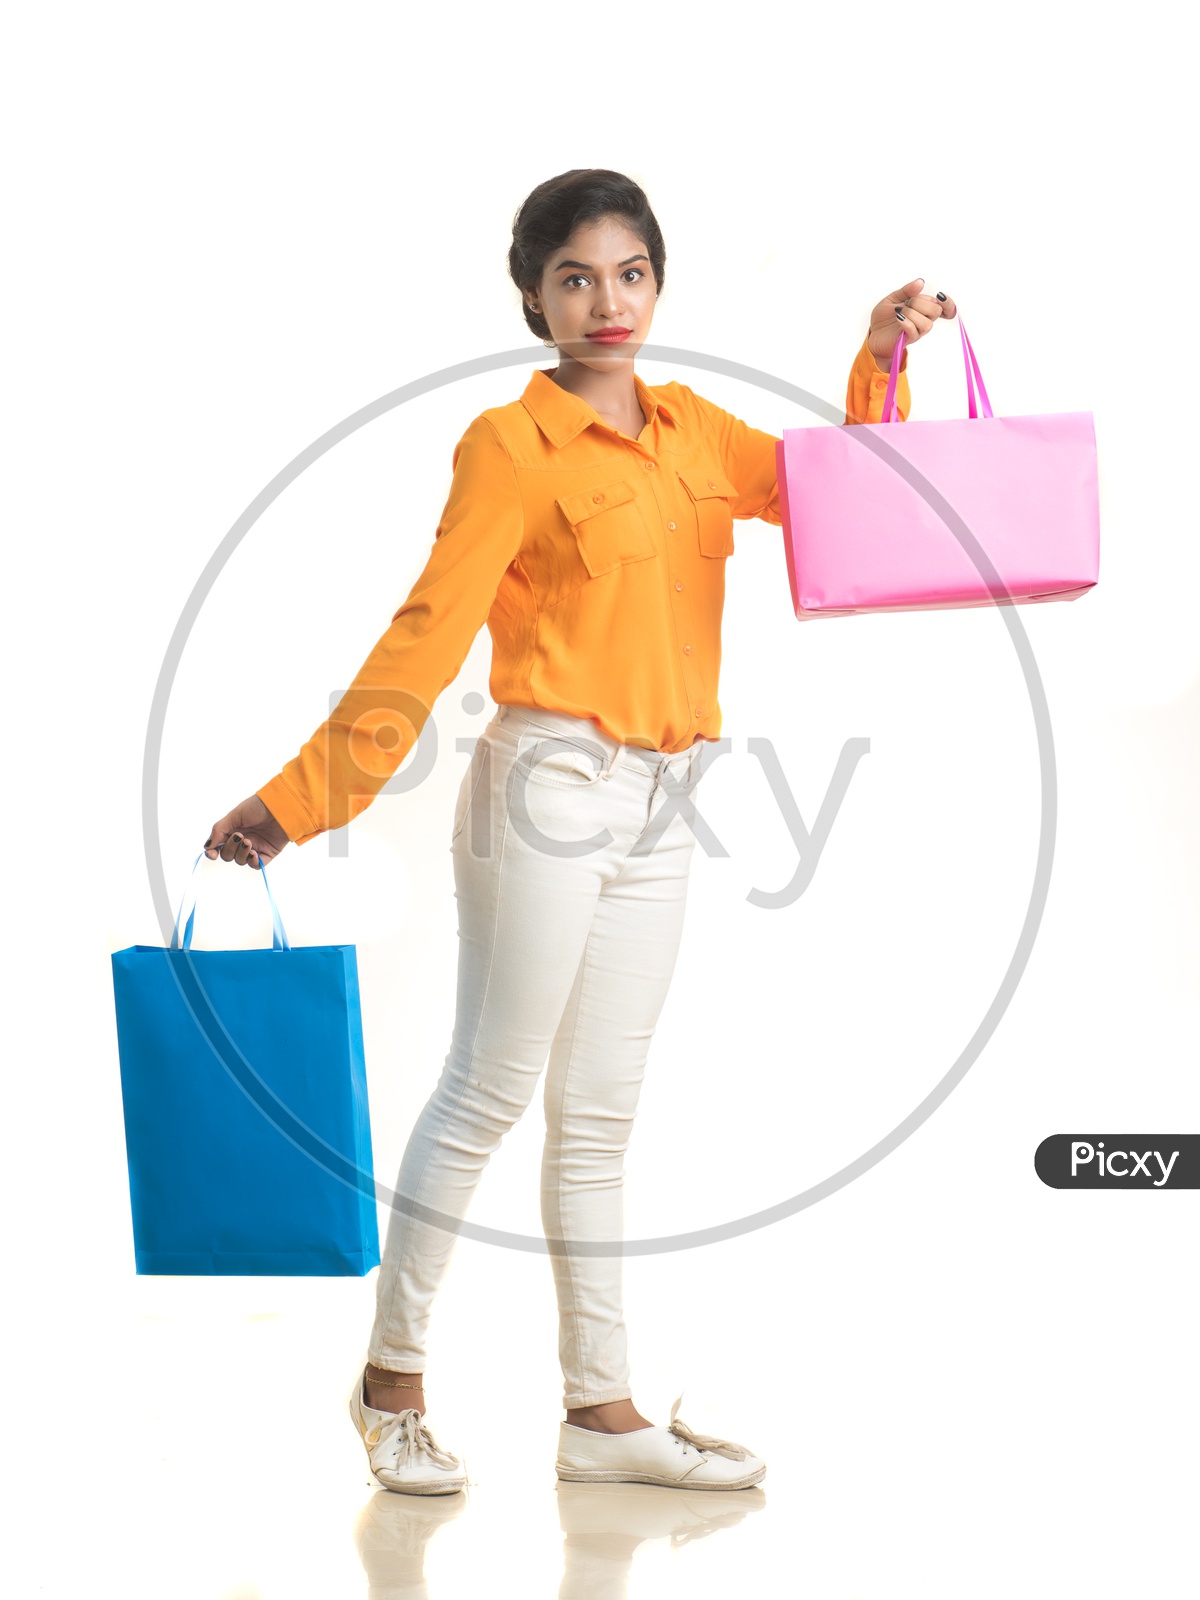 Indian woman wearing orange shirt and white pant holding hand bags